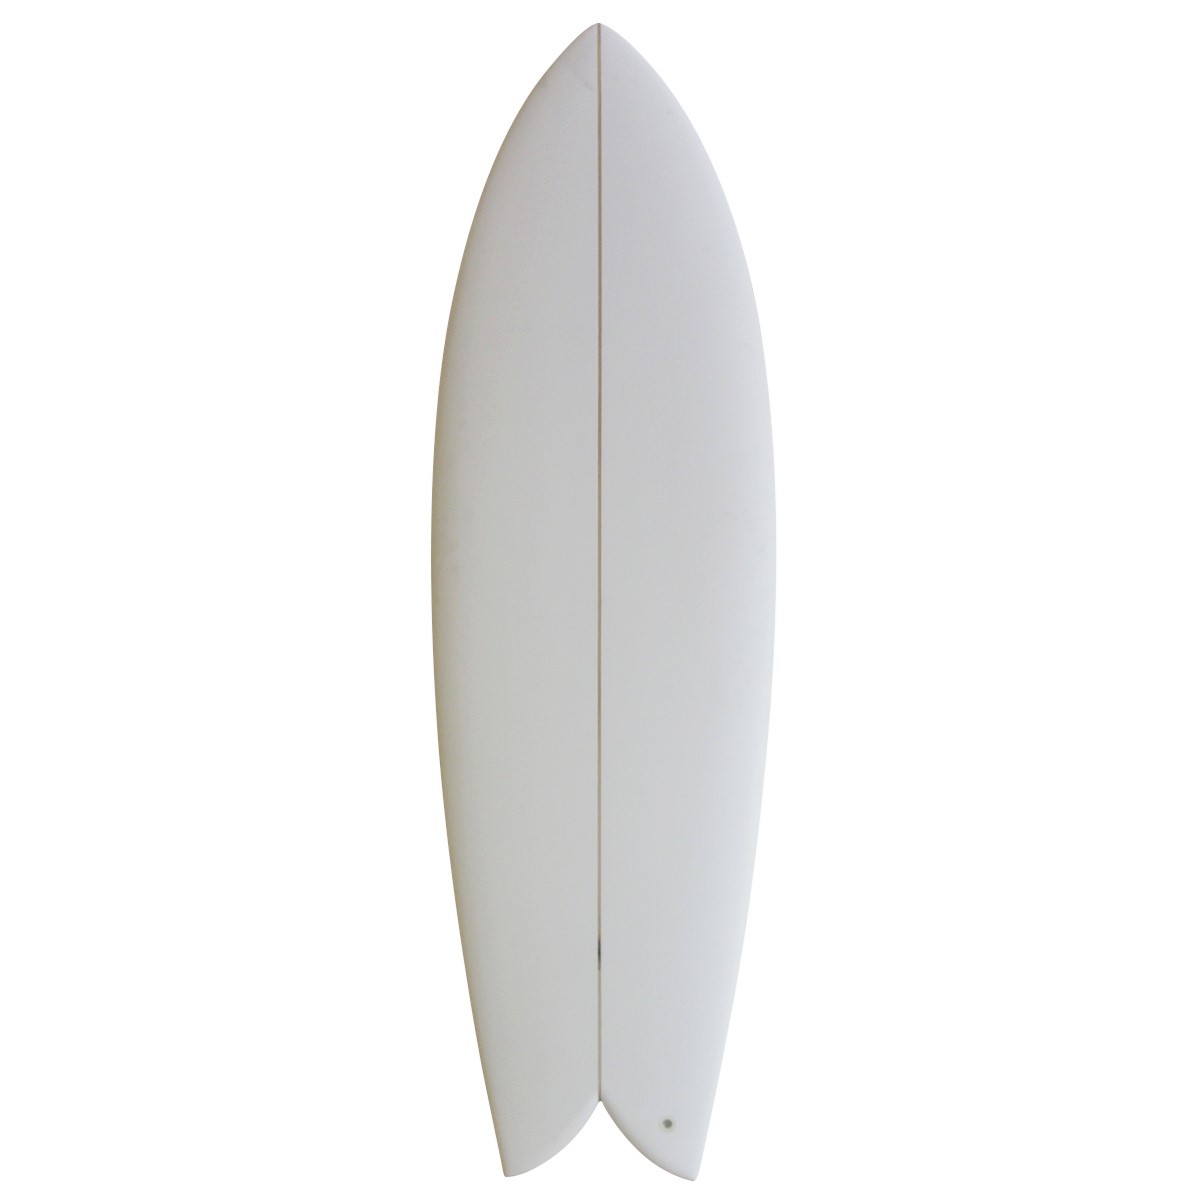  / Nodecal / Twin Fish 5`9 White